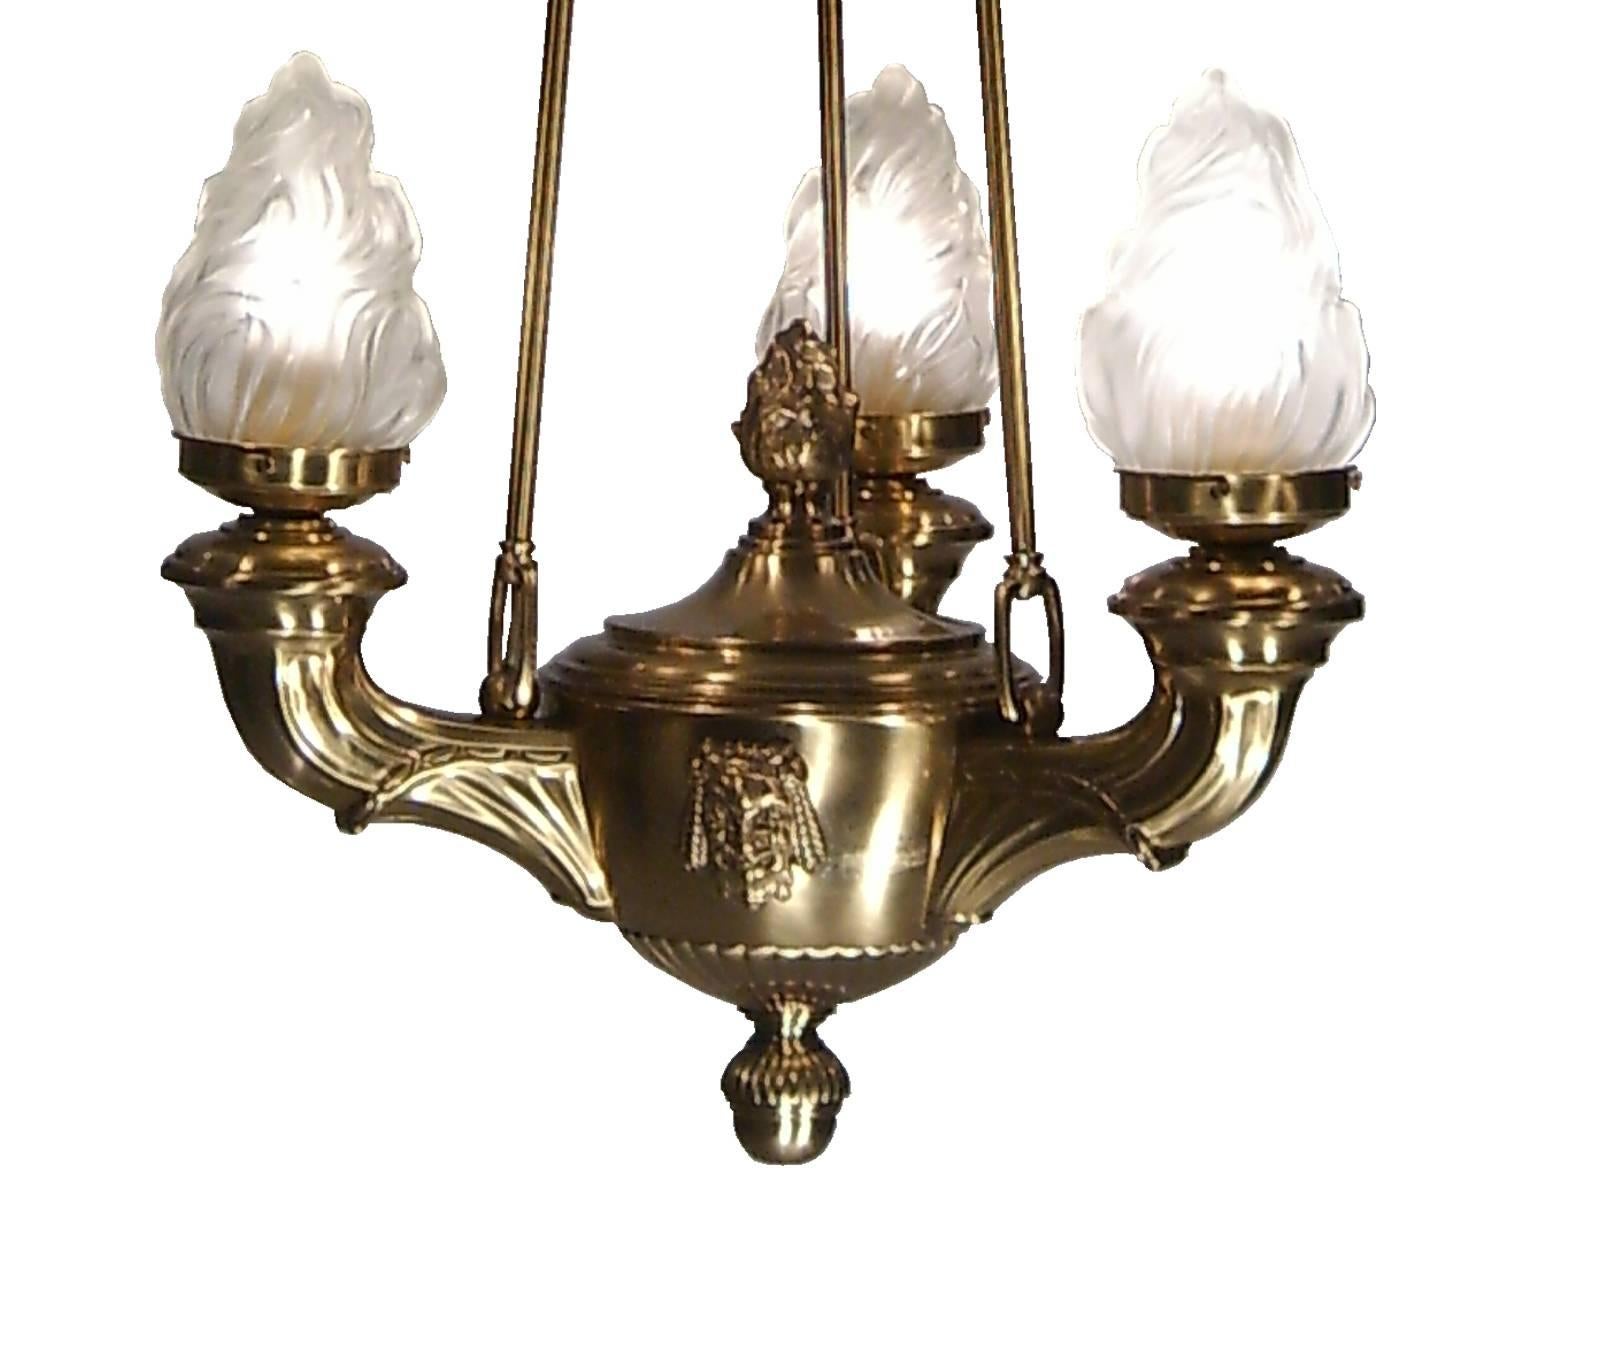 Brass chandelier with glass-shades.

Technical data:
Height 100 cm (39.37 inch) 
Ø 45 cm (17.72 inch) 
Power: 3-6W-LED 
 
All components according to the UL regulations.